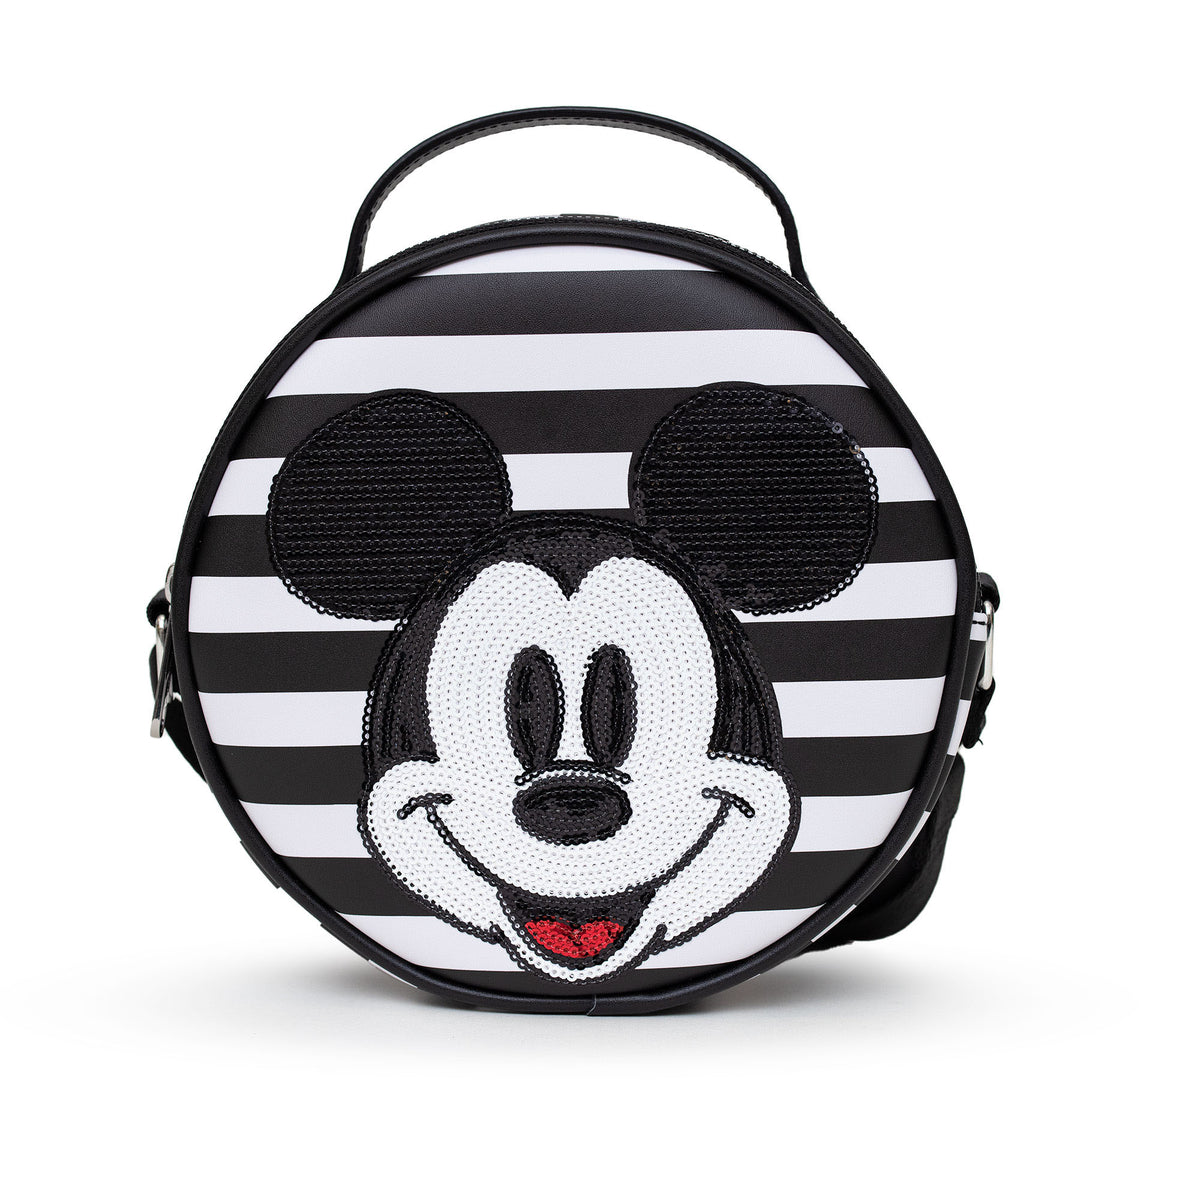 Buckle Down Disney Bag, Cross Body, Round, Mickey Mouse Rhinestone Smiling  Face Outline, Black Vegan Patent Leather